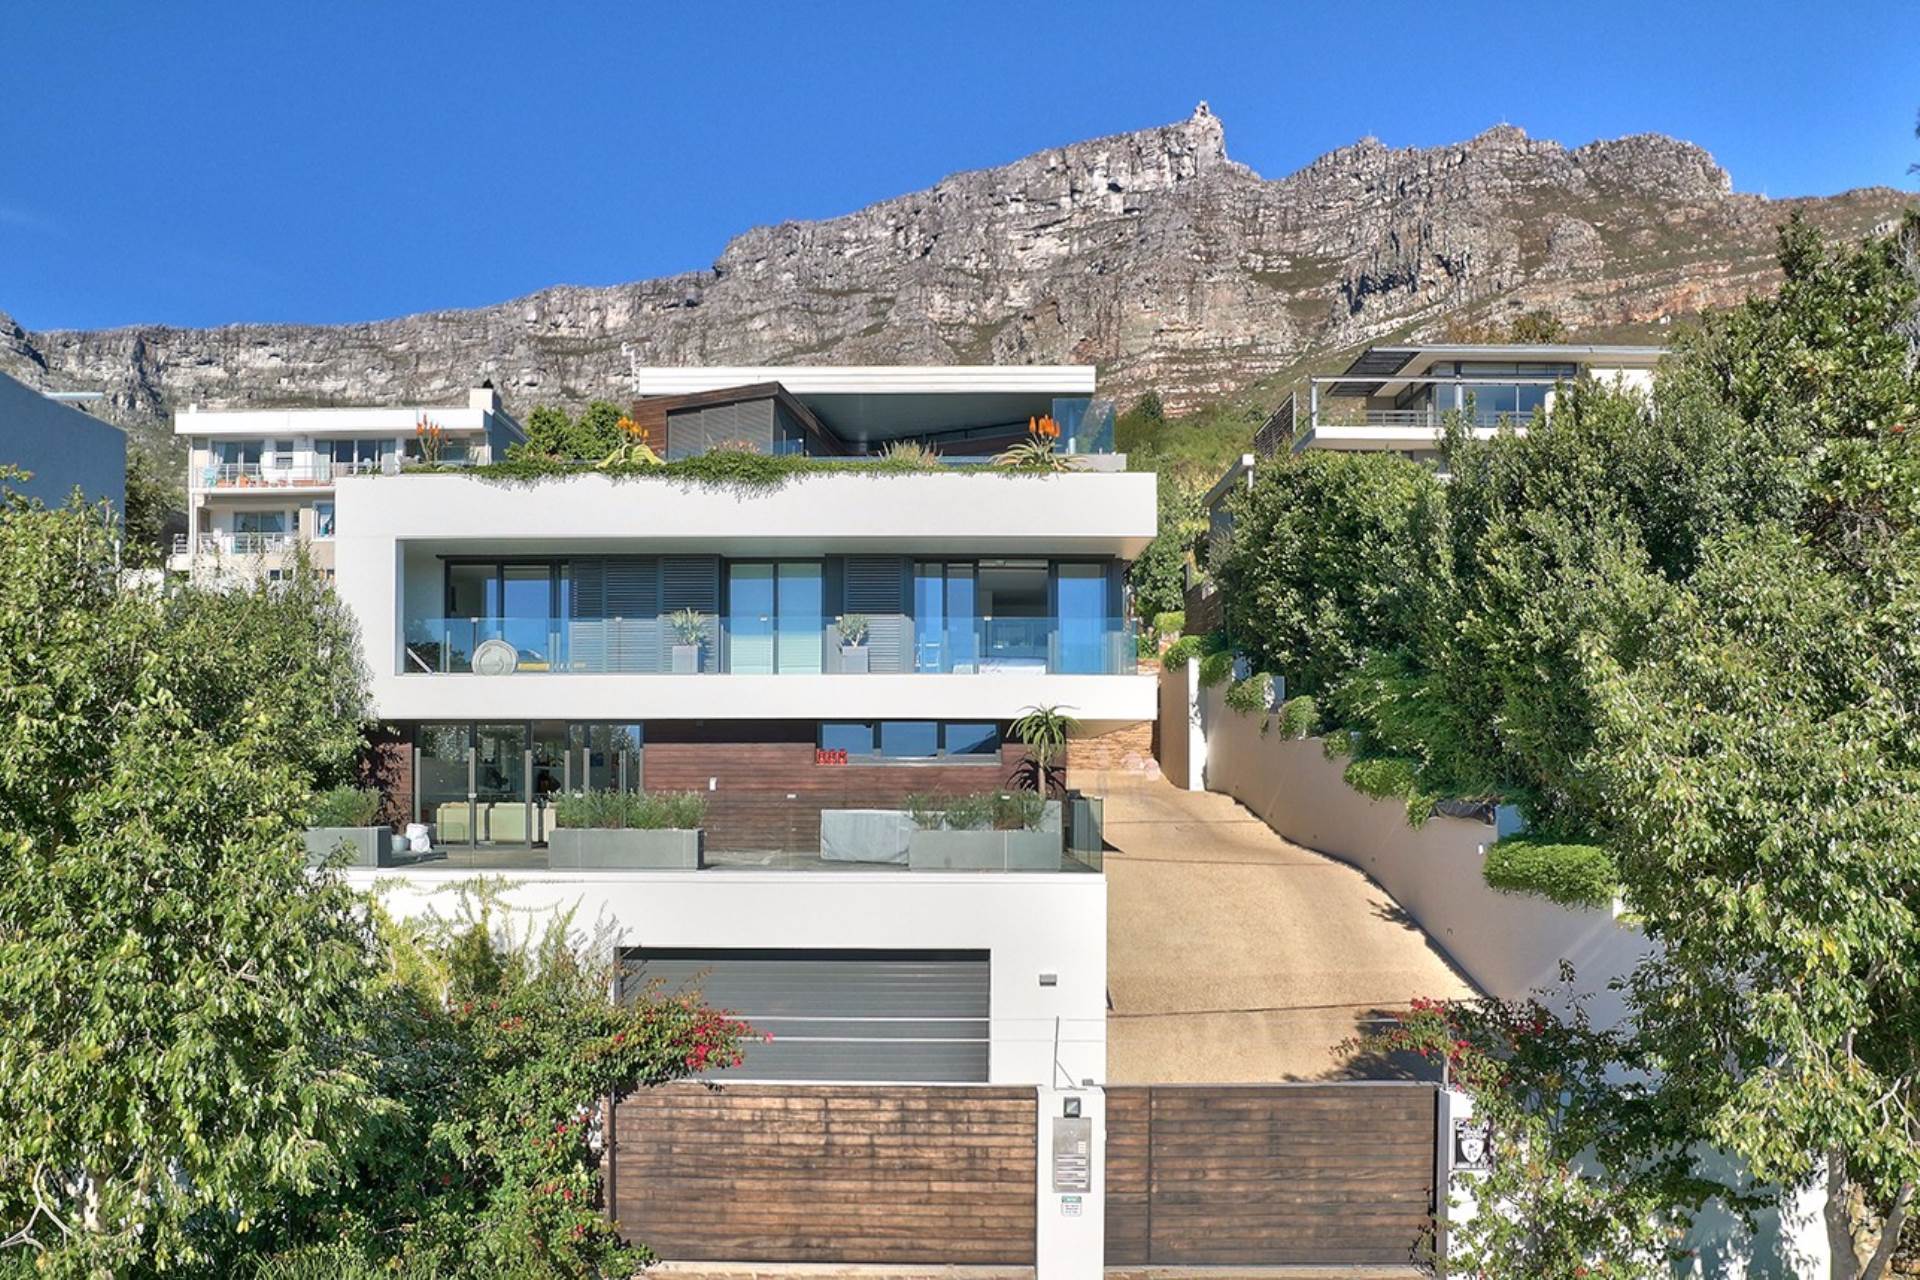 House For Sale In Higgovale, Cape Town, Western Cape for R 125,000,000